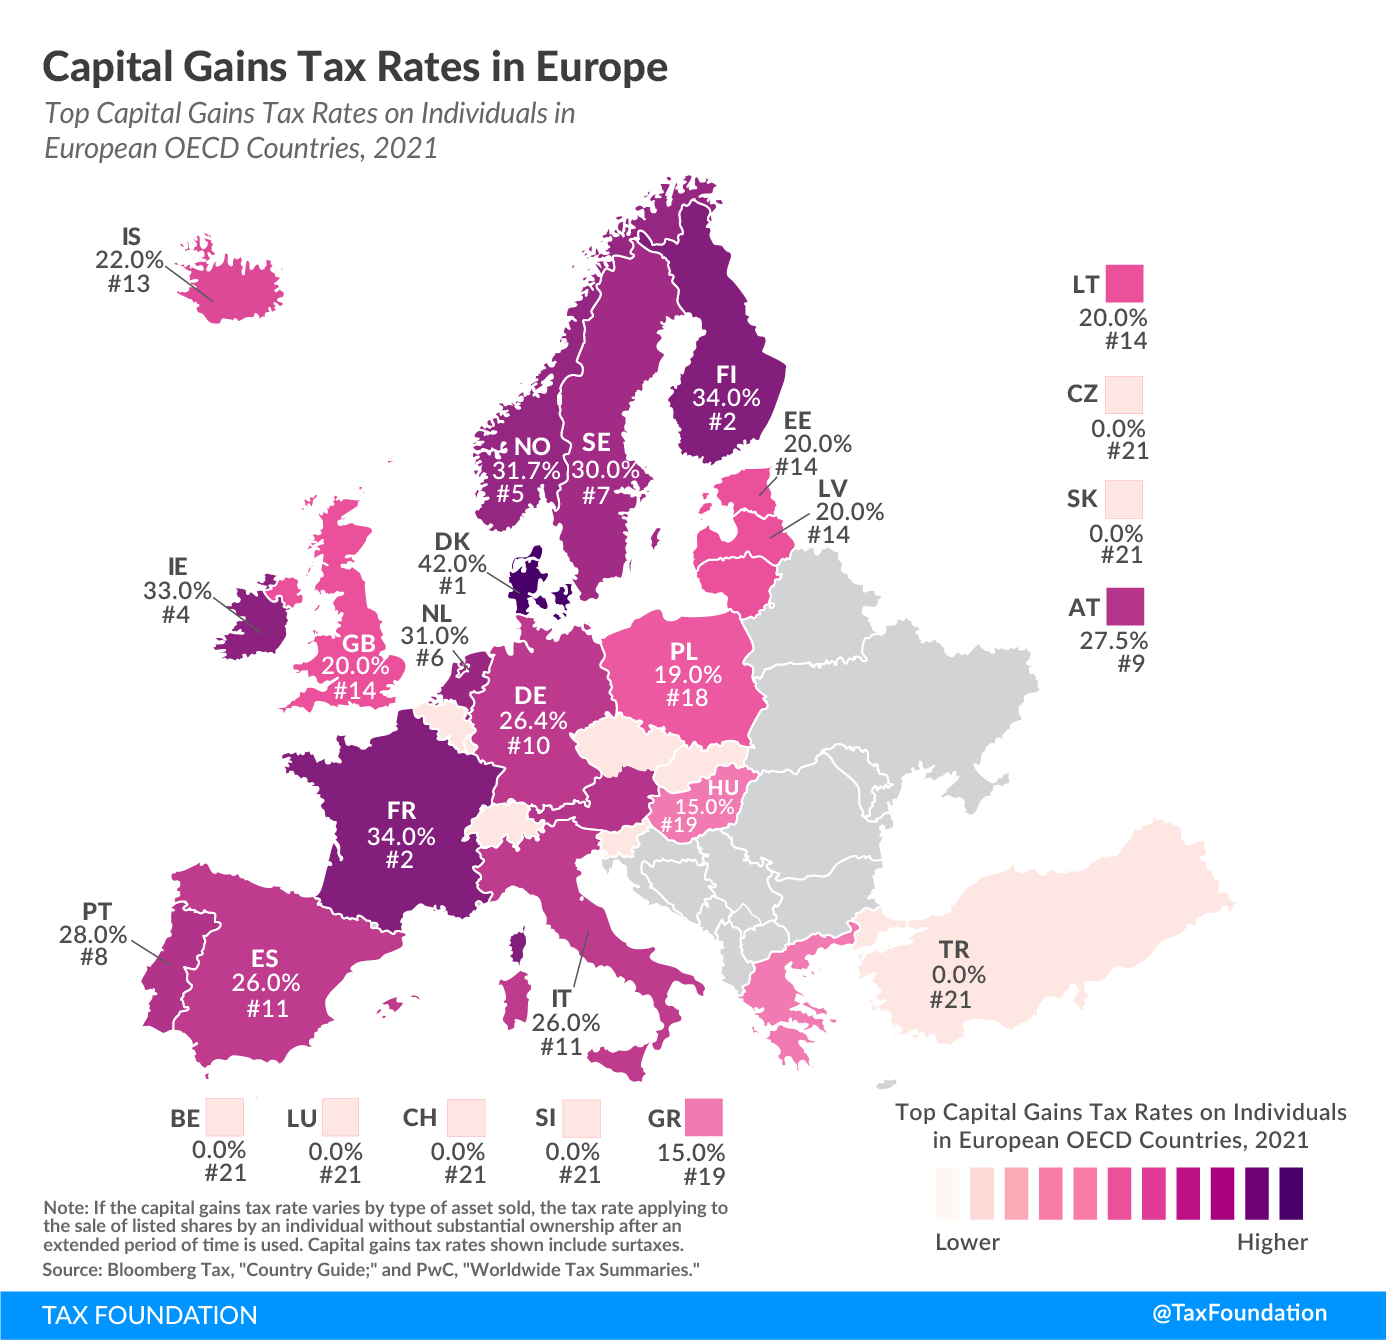 Capital Gains Tax Rates in Europe map